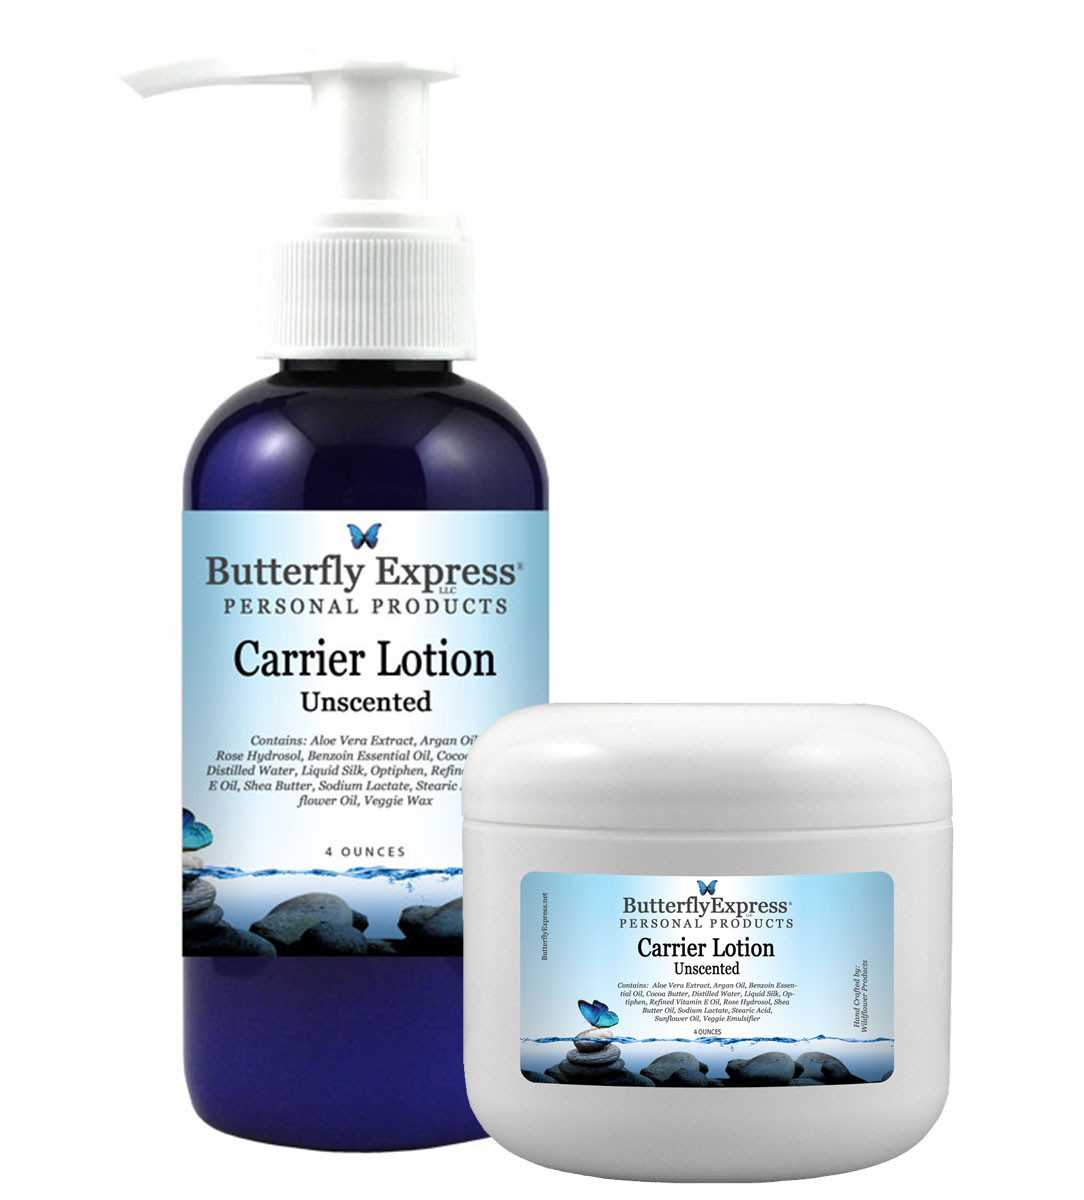 Carrier Lotion